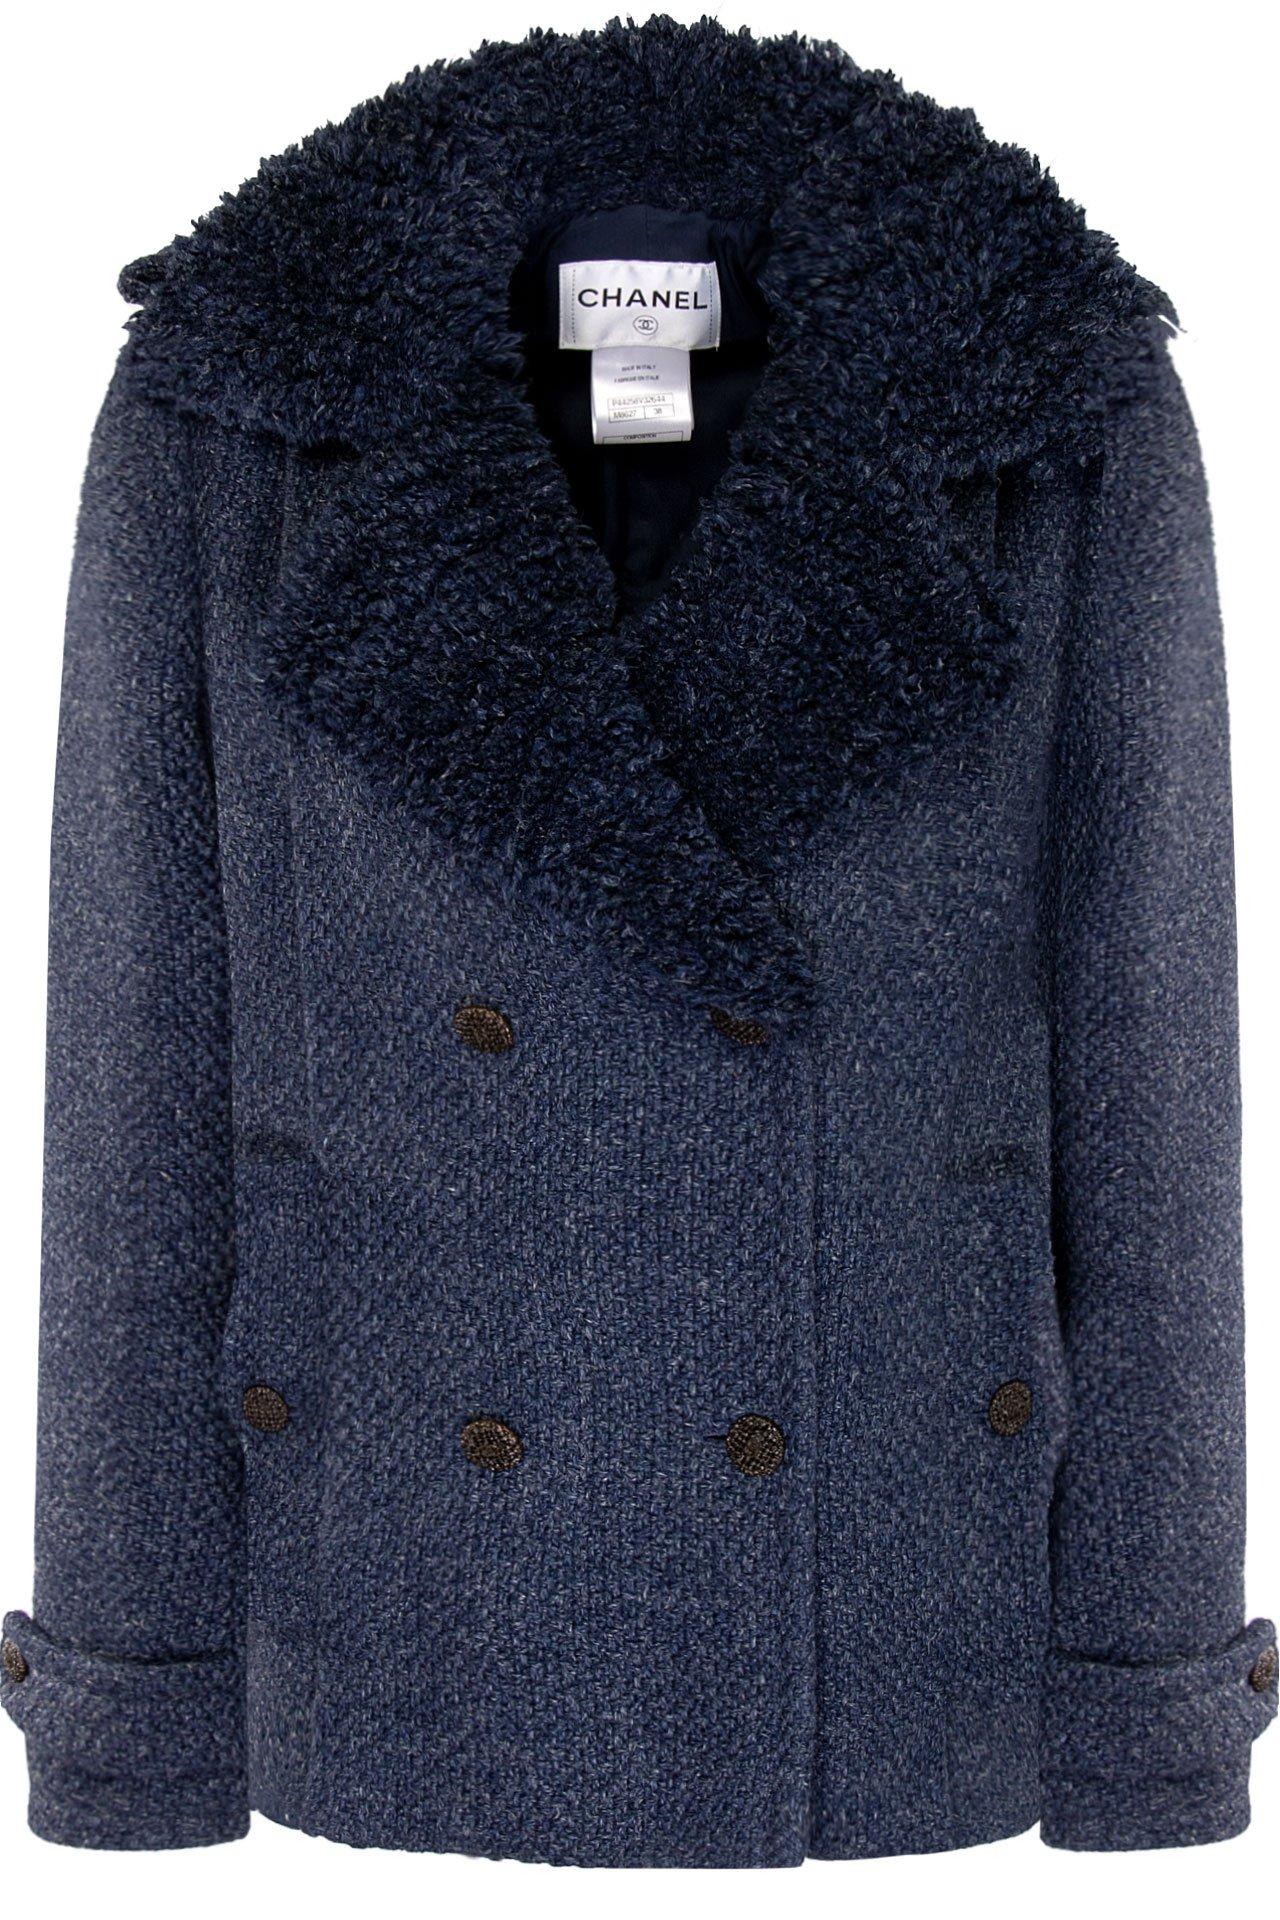 Women's or Men's Chanel CC Buttons Fluffy Tweed Jacket / Coat For Sale